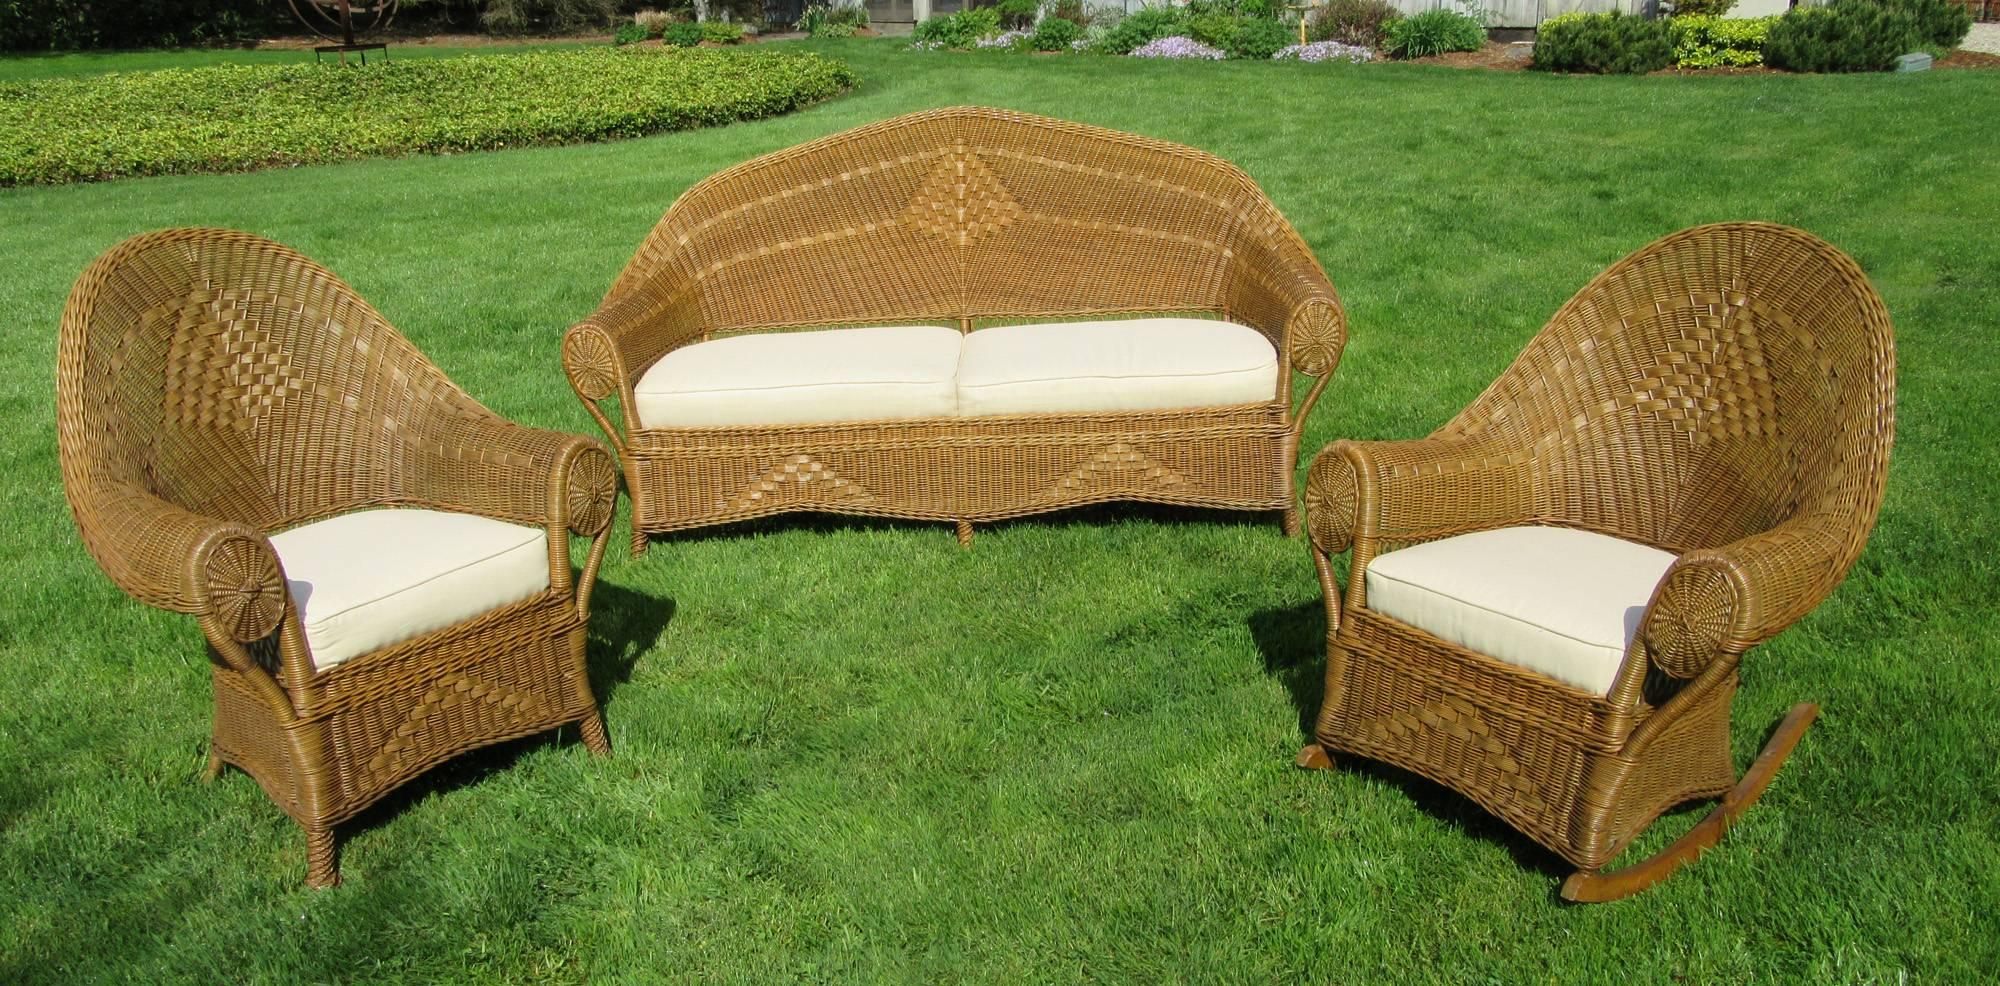 Three-piece Art Deco wicker set in original honey-toned natural stained finish. A fine example of high style American antique wicker made by the Heywood Wakefield Co., circa 1925. Matching set includes sofa, armchair, and rocking chair. Wide rolled